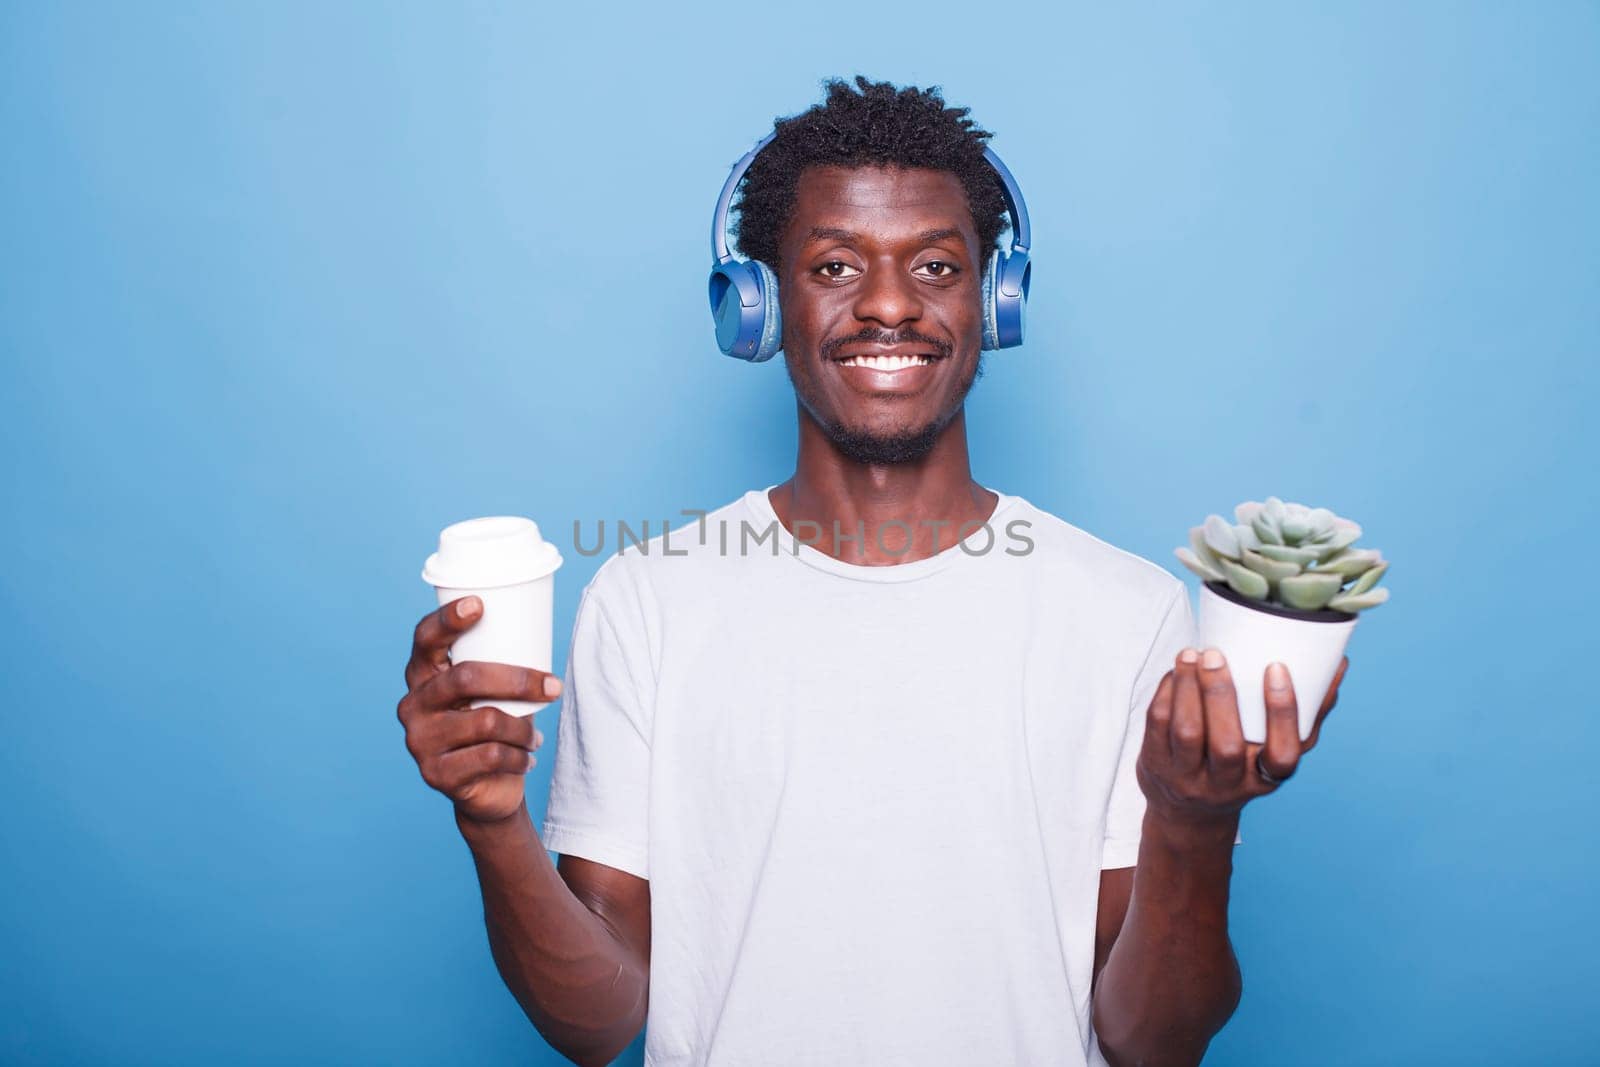 Portrait of happy African American man standing in front of a blue background with a potted plant while carrying a beverage. Smiling black guy holding a coffee cup and wearing wireless headphones.